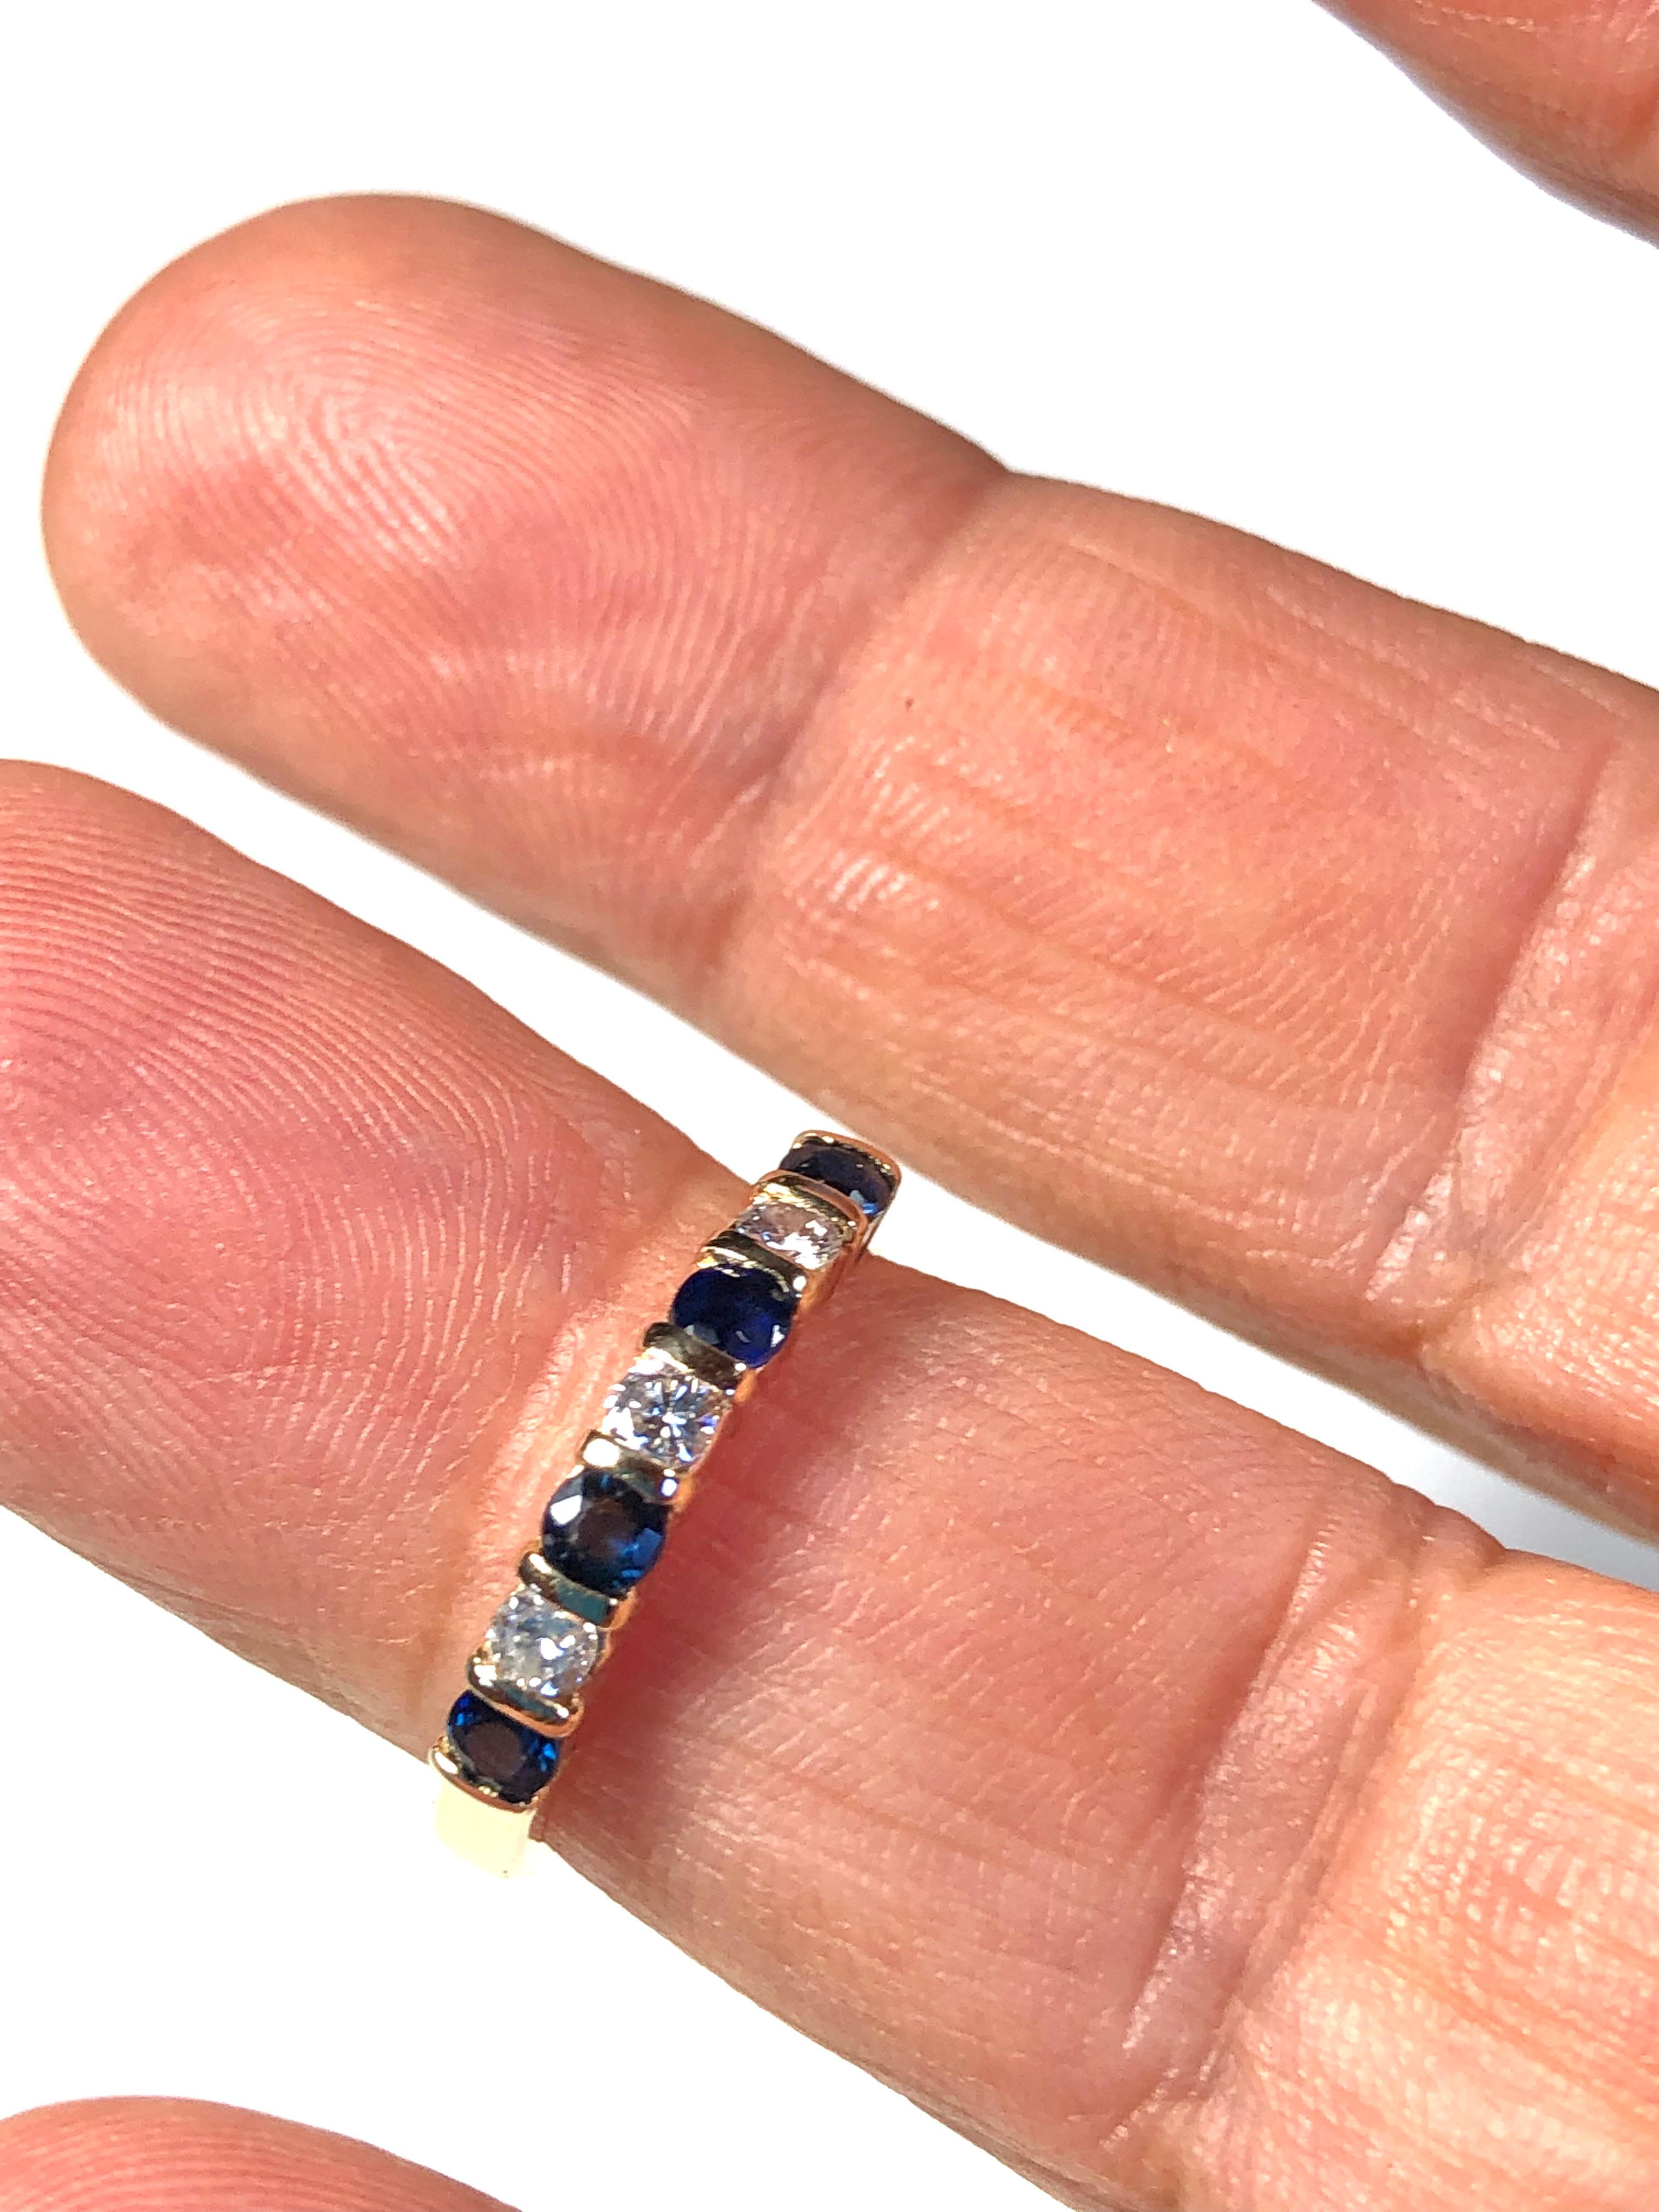 Natural Blue Sapphire and Round Brilliant Cut Diamond Wedding Band Ring 
Diamond quality: H in Color and SI in Clarity
Diamond Approx. Weight: 0.24ct 
Blue Sapphire Approx. Weight: 0.36ct 
Metal: 14K yellow gold Ring Width: 3.1mm Highly